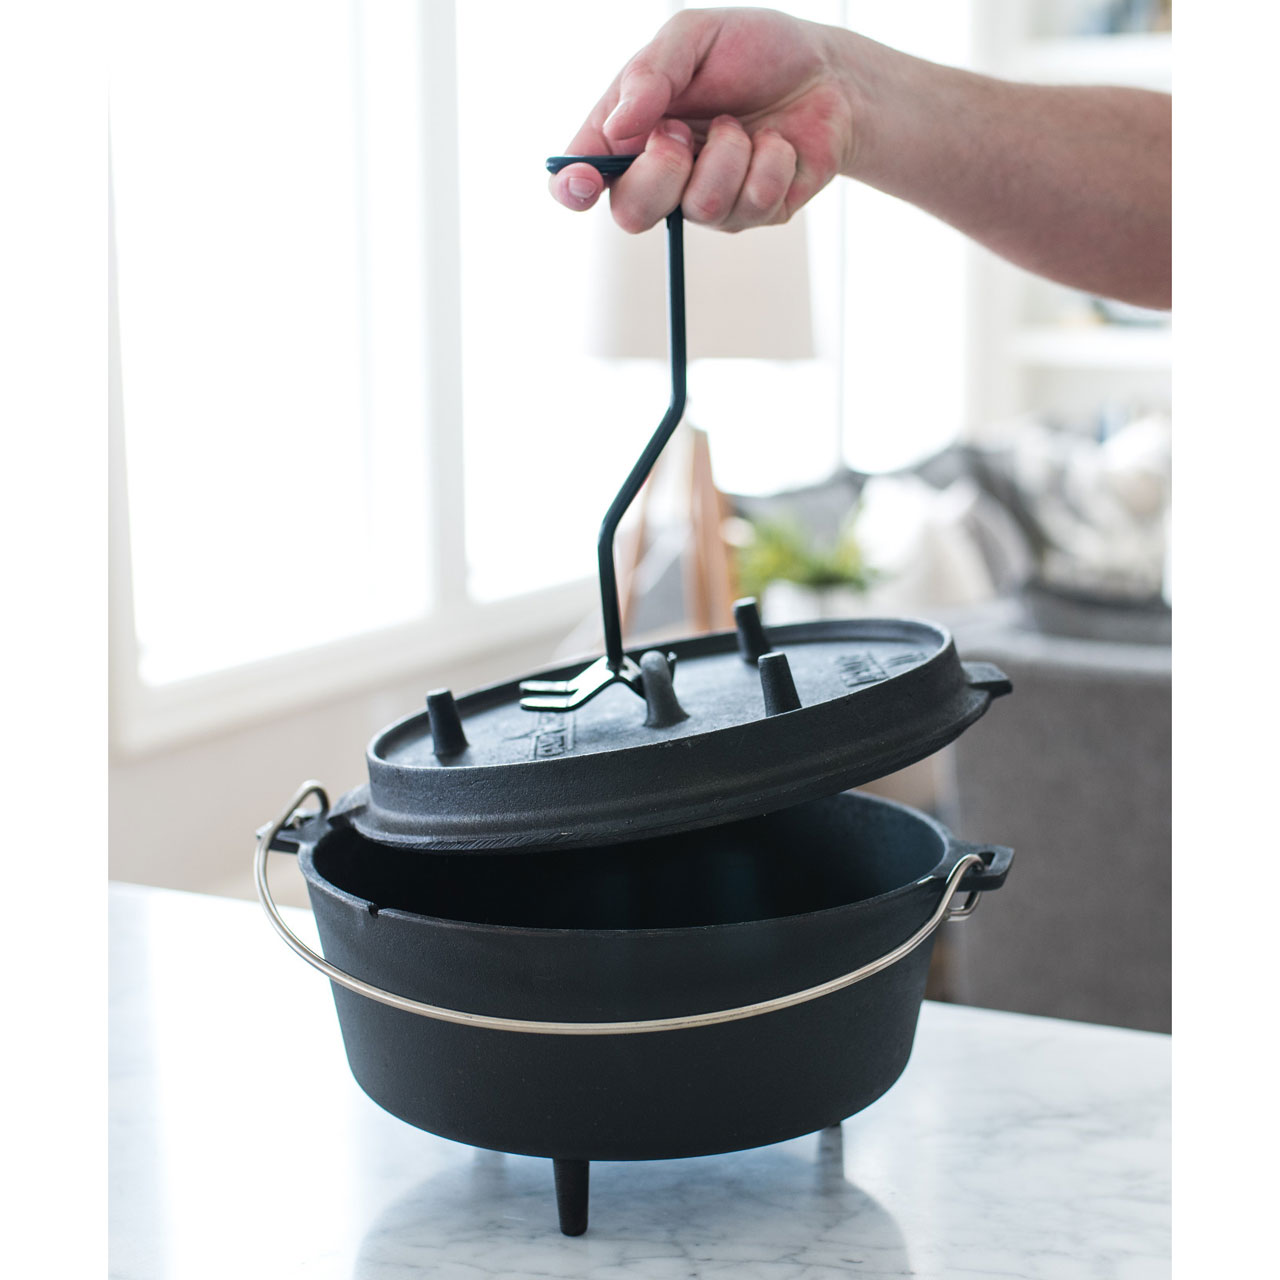 Camp Chef 10'' Deluxe Dutch Oven